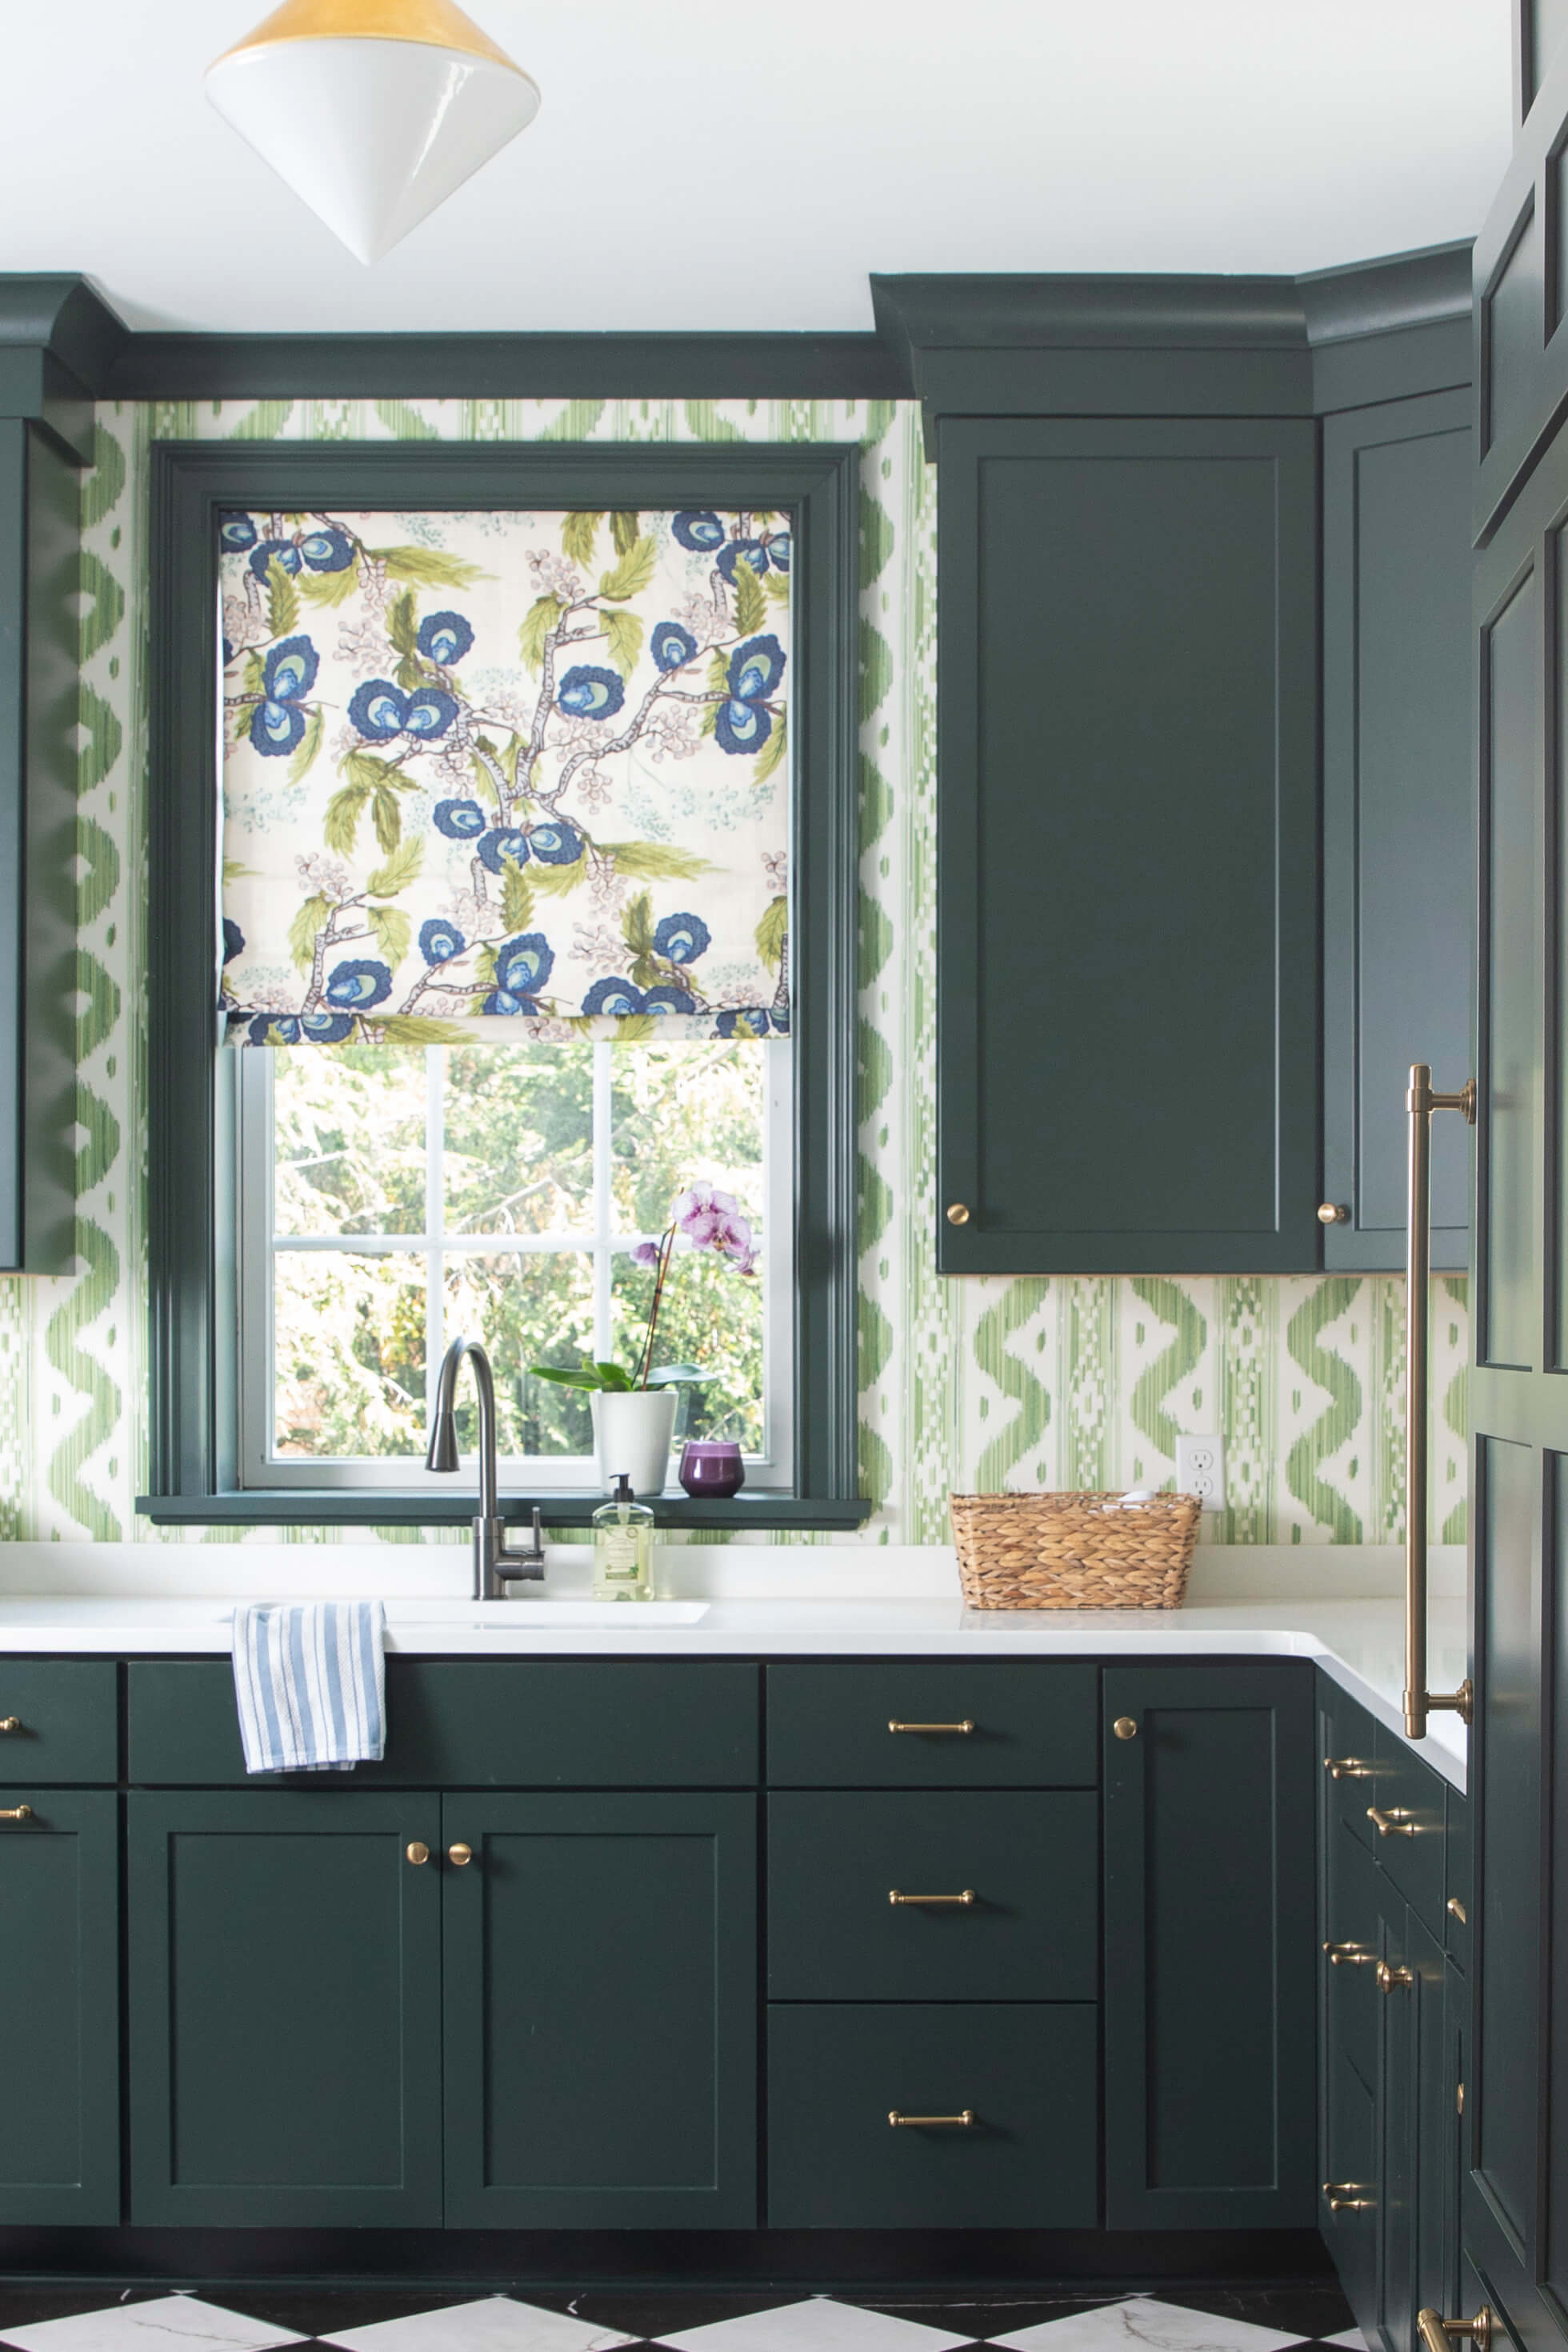 A colorful kitchen design with vibrant green and white wallpaper, dark green painted cabinets & trim and bright white countertops.